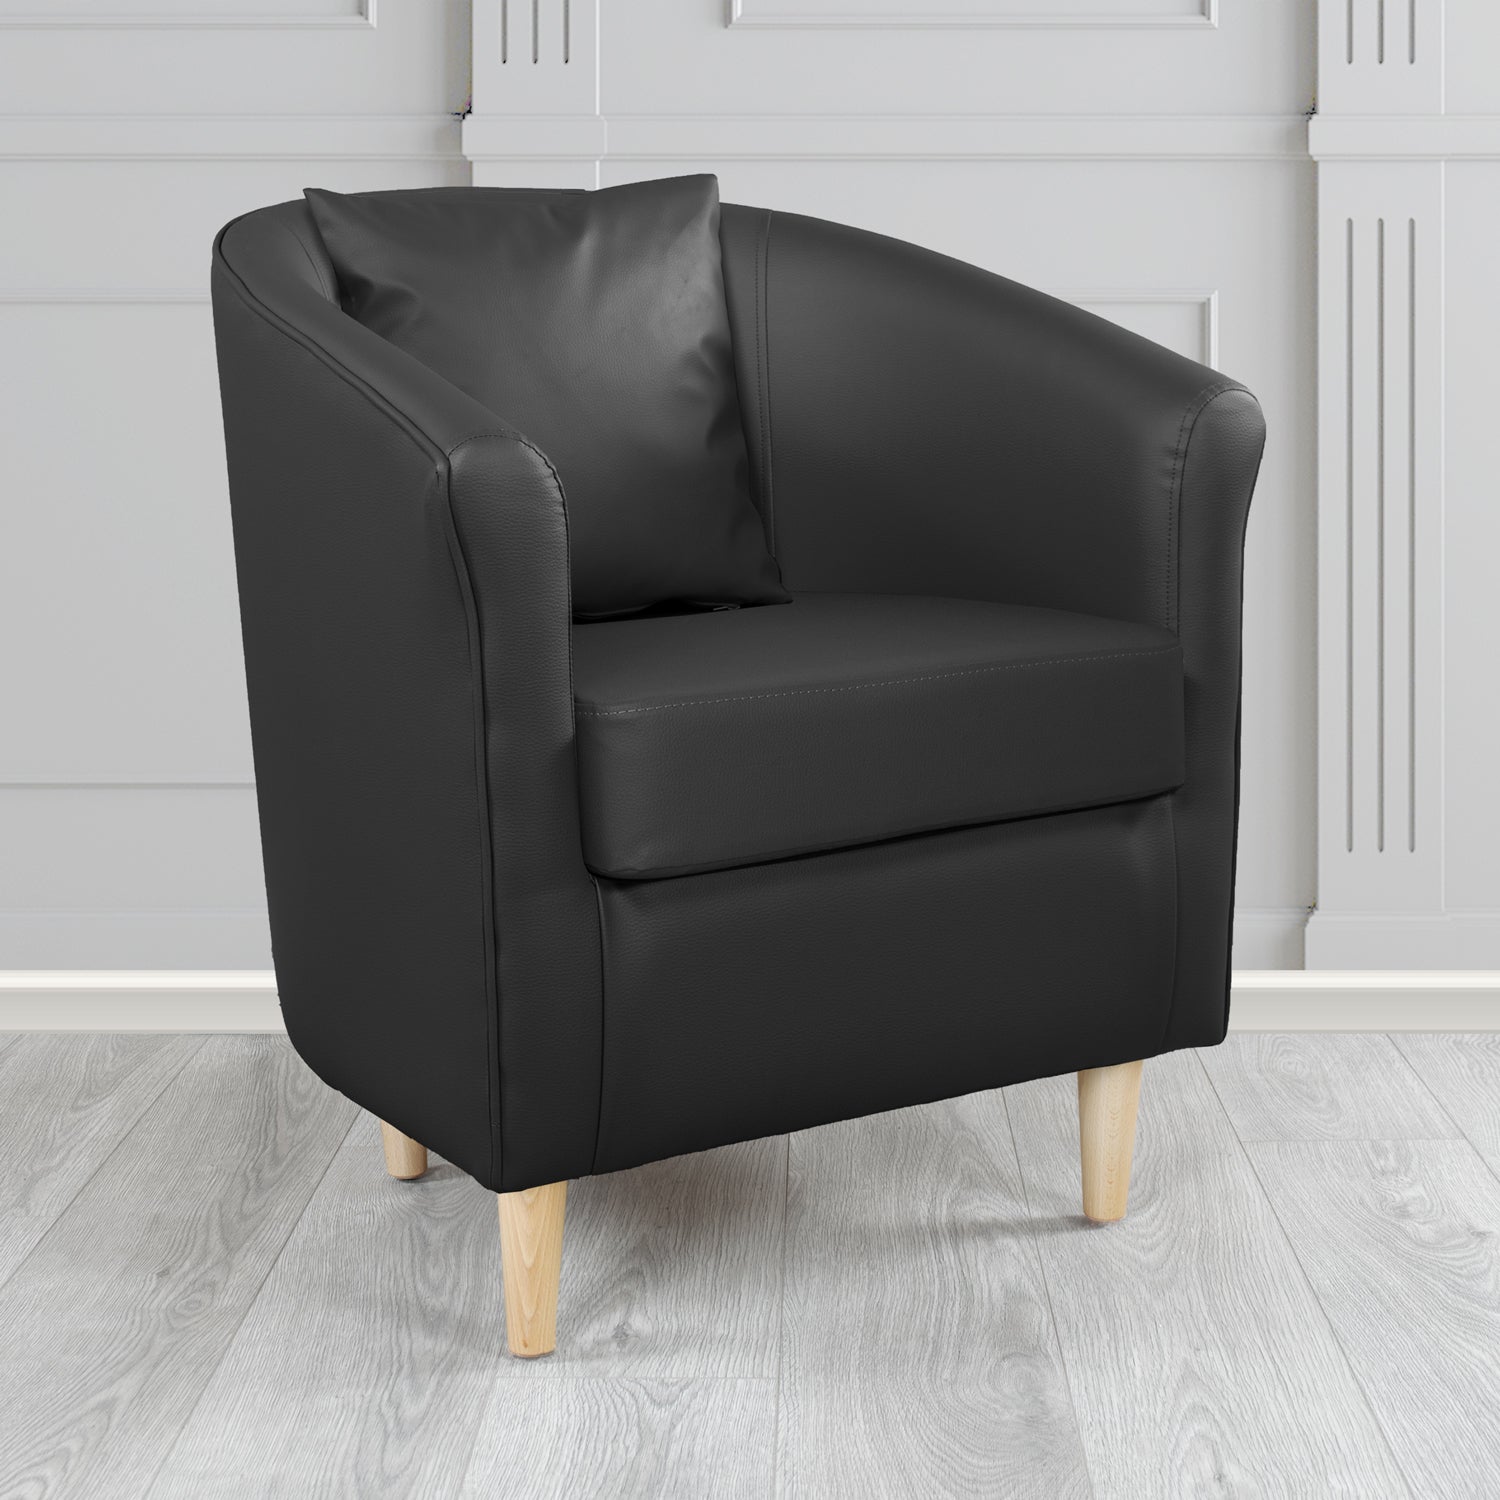 St Tropez Tub Chair with Scatter Cushion in Madrid Black Faux Leather - The Tub Chair Shop